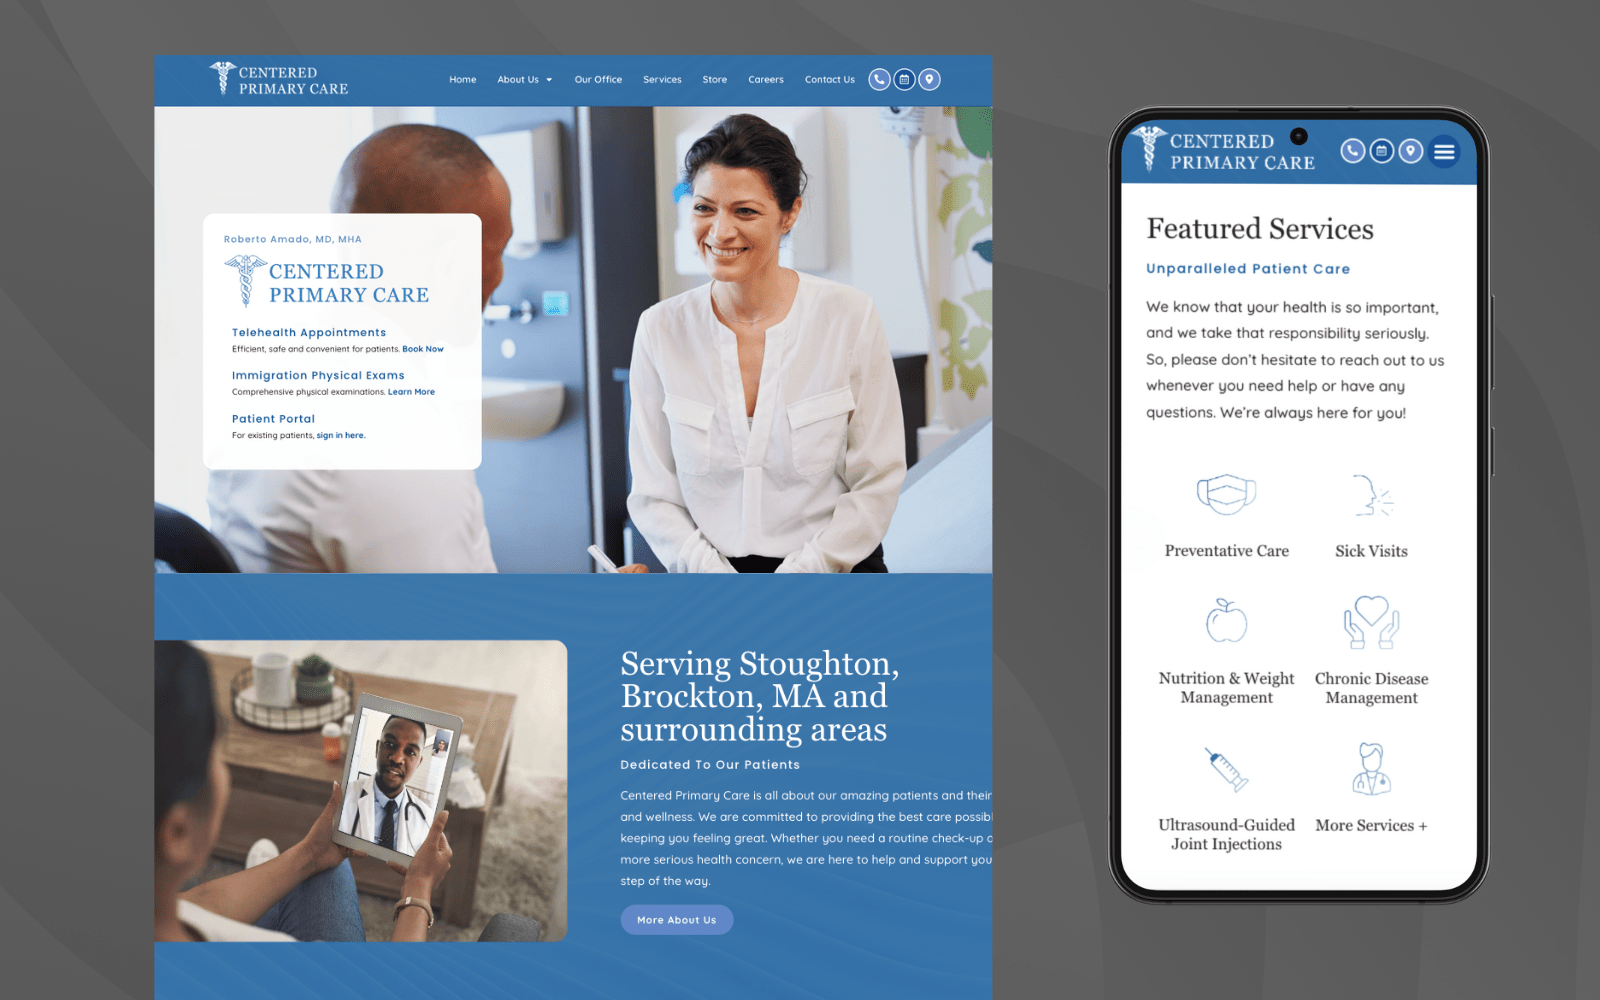 Website design for dental practice featuring clean layout, professional color scheme, and easy navigation for patients.